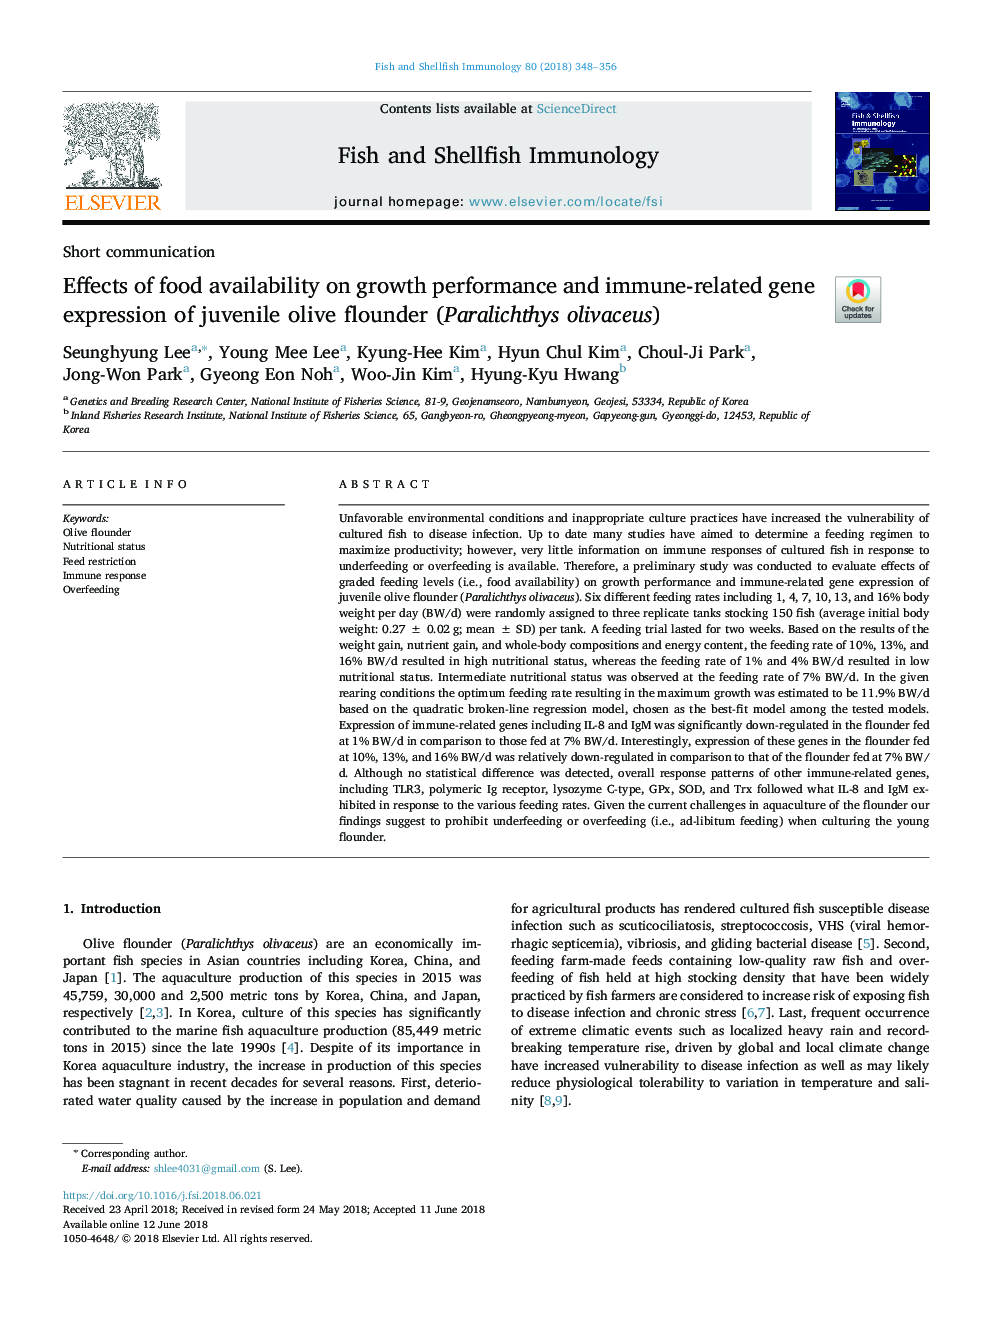 Effects of food availability on growth performance and immune-related gene expression of juvenile olive flounder (Paralichthys olivaceus)